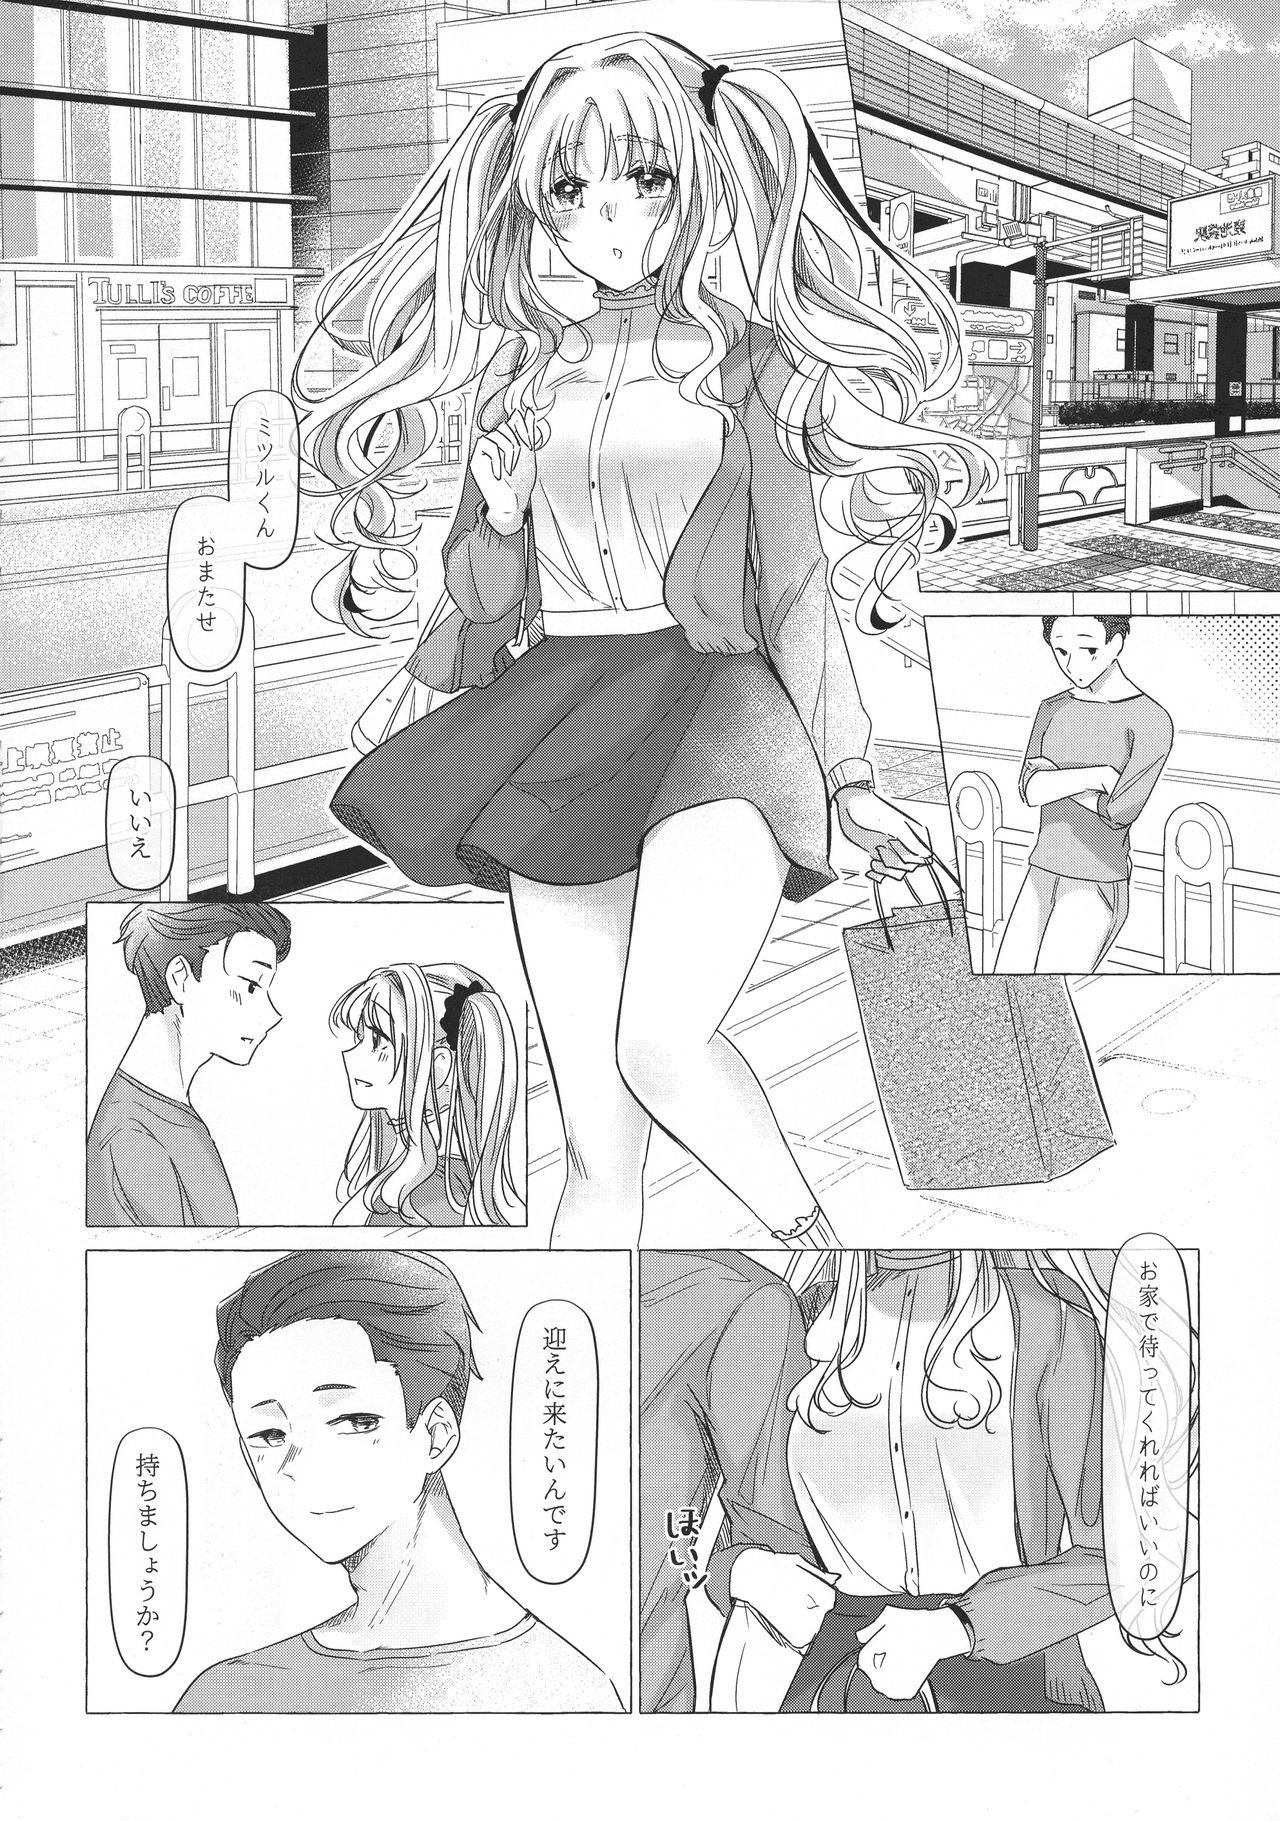 Women 満心総意の躾 - Darling in the franxx Teenage - Page 9